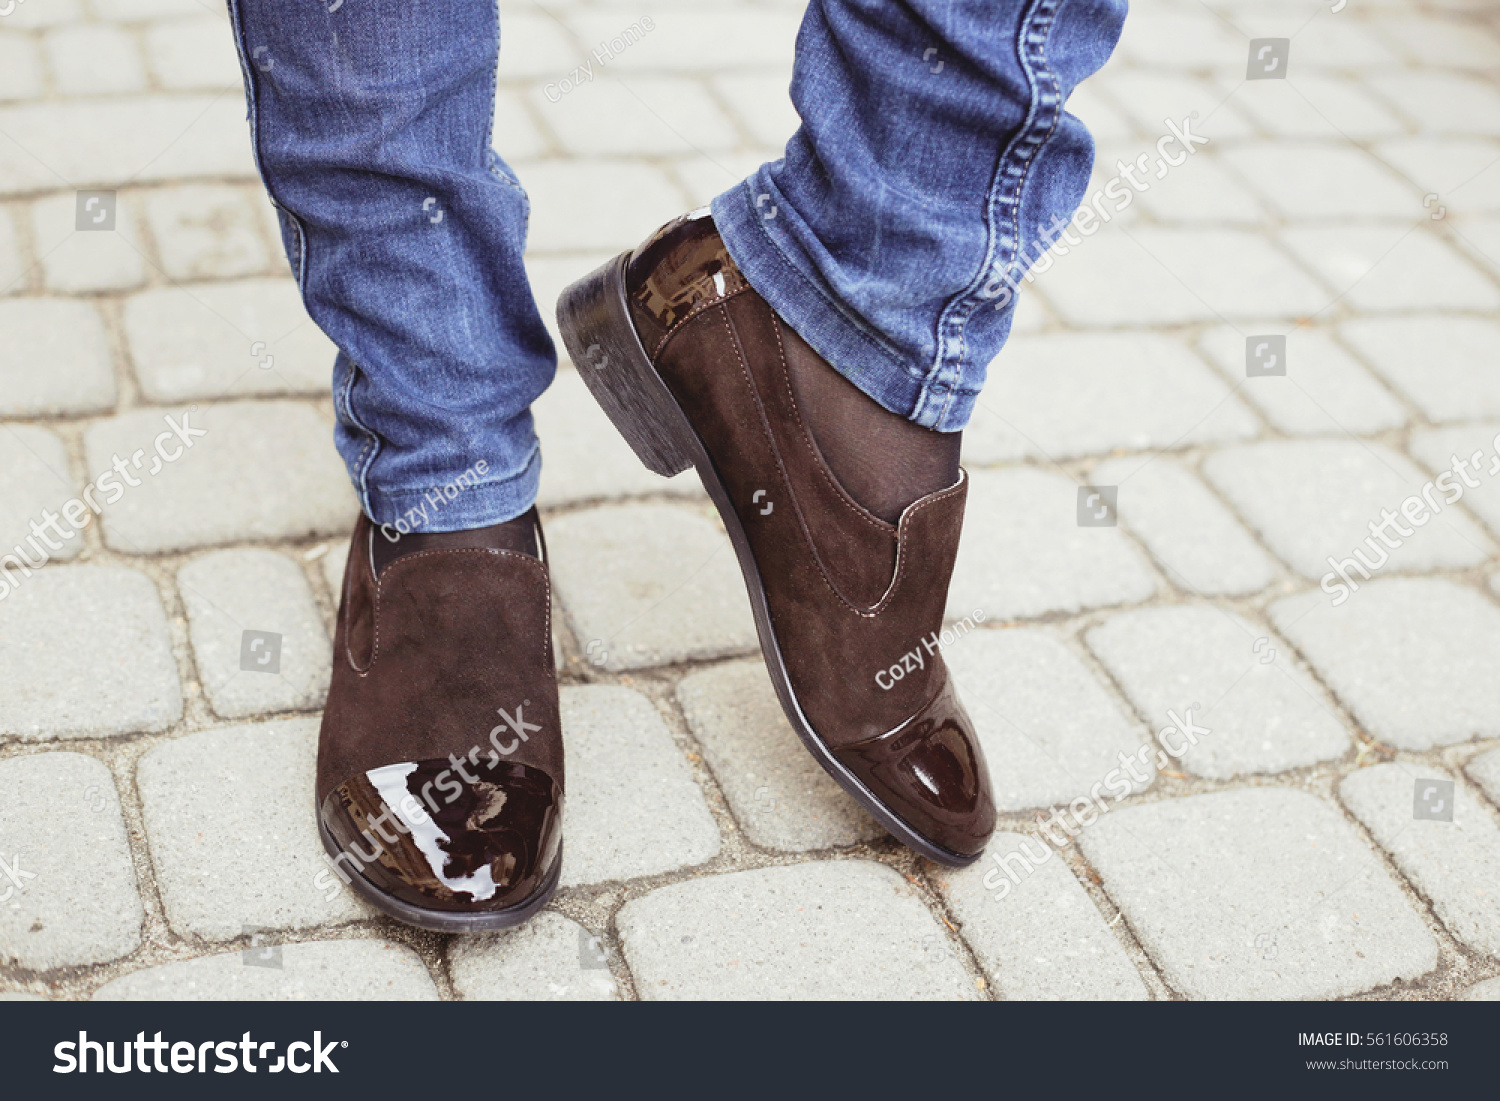 suede shoes with jeans